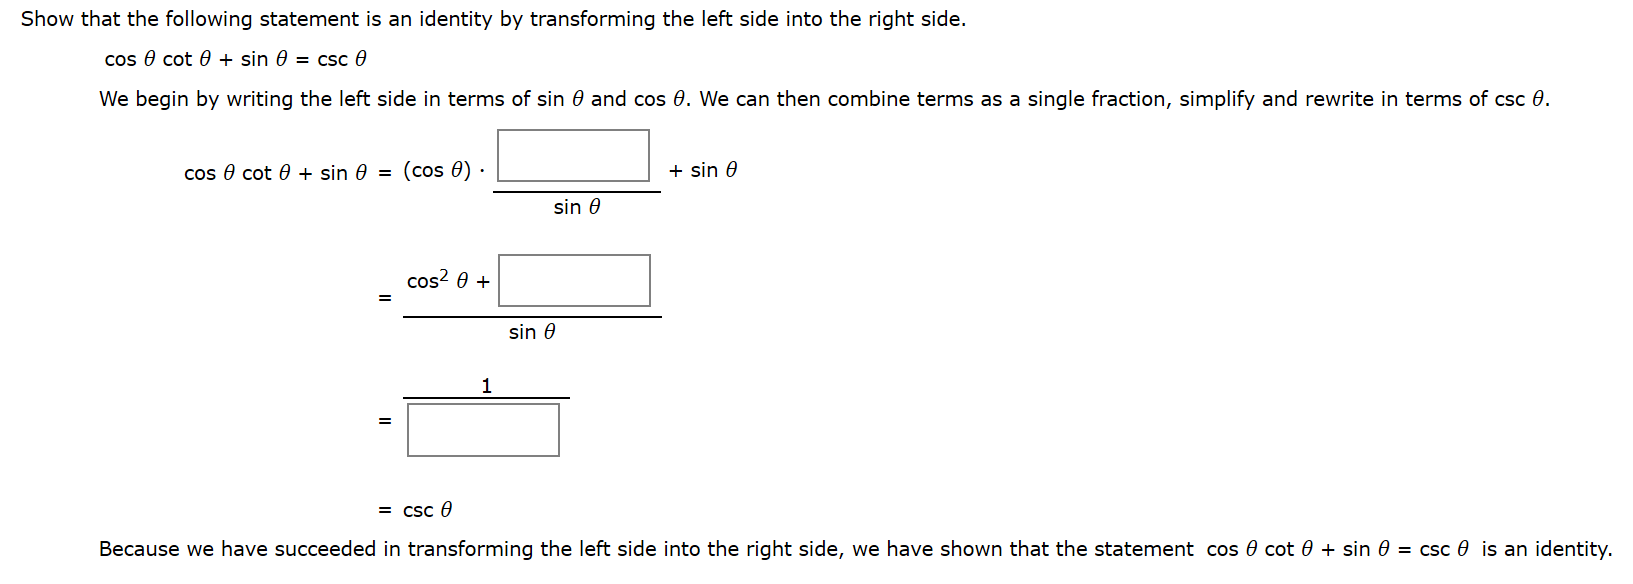 Show that the following statement is an identity by transforming the left side into the right side.
cos e cot 0 + sin 0 = csc 0
We begin by writing the left side in terms of sin 0 and cos 0. We can then combine terms as a single fraction, simplify and rewrite in terms of csc 0.
cos e cot 0 + sin 0 = (cos 0)
+ sin 0
sin 0
cos? 0 +
sin 0
1
= csc 0
Because we have succeeded in transforming the left side into the right side, we have shown that the statement cos 0 cot 0 + sin 0 = csc 0 is an identity.
